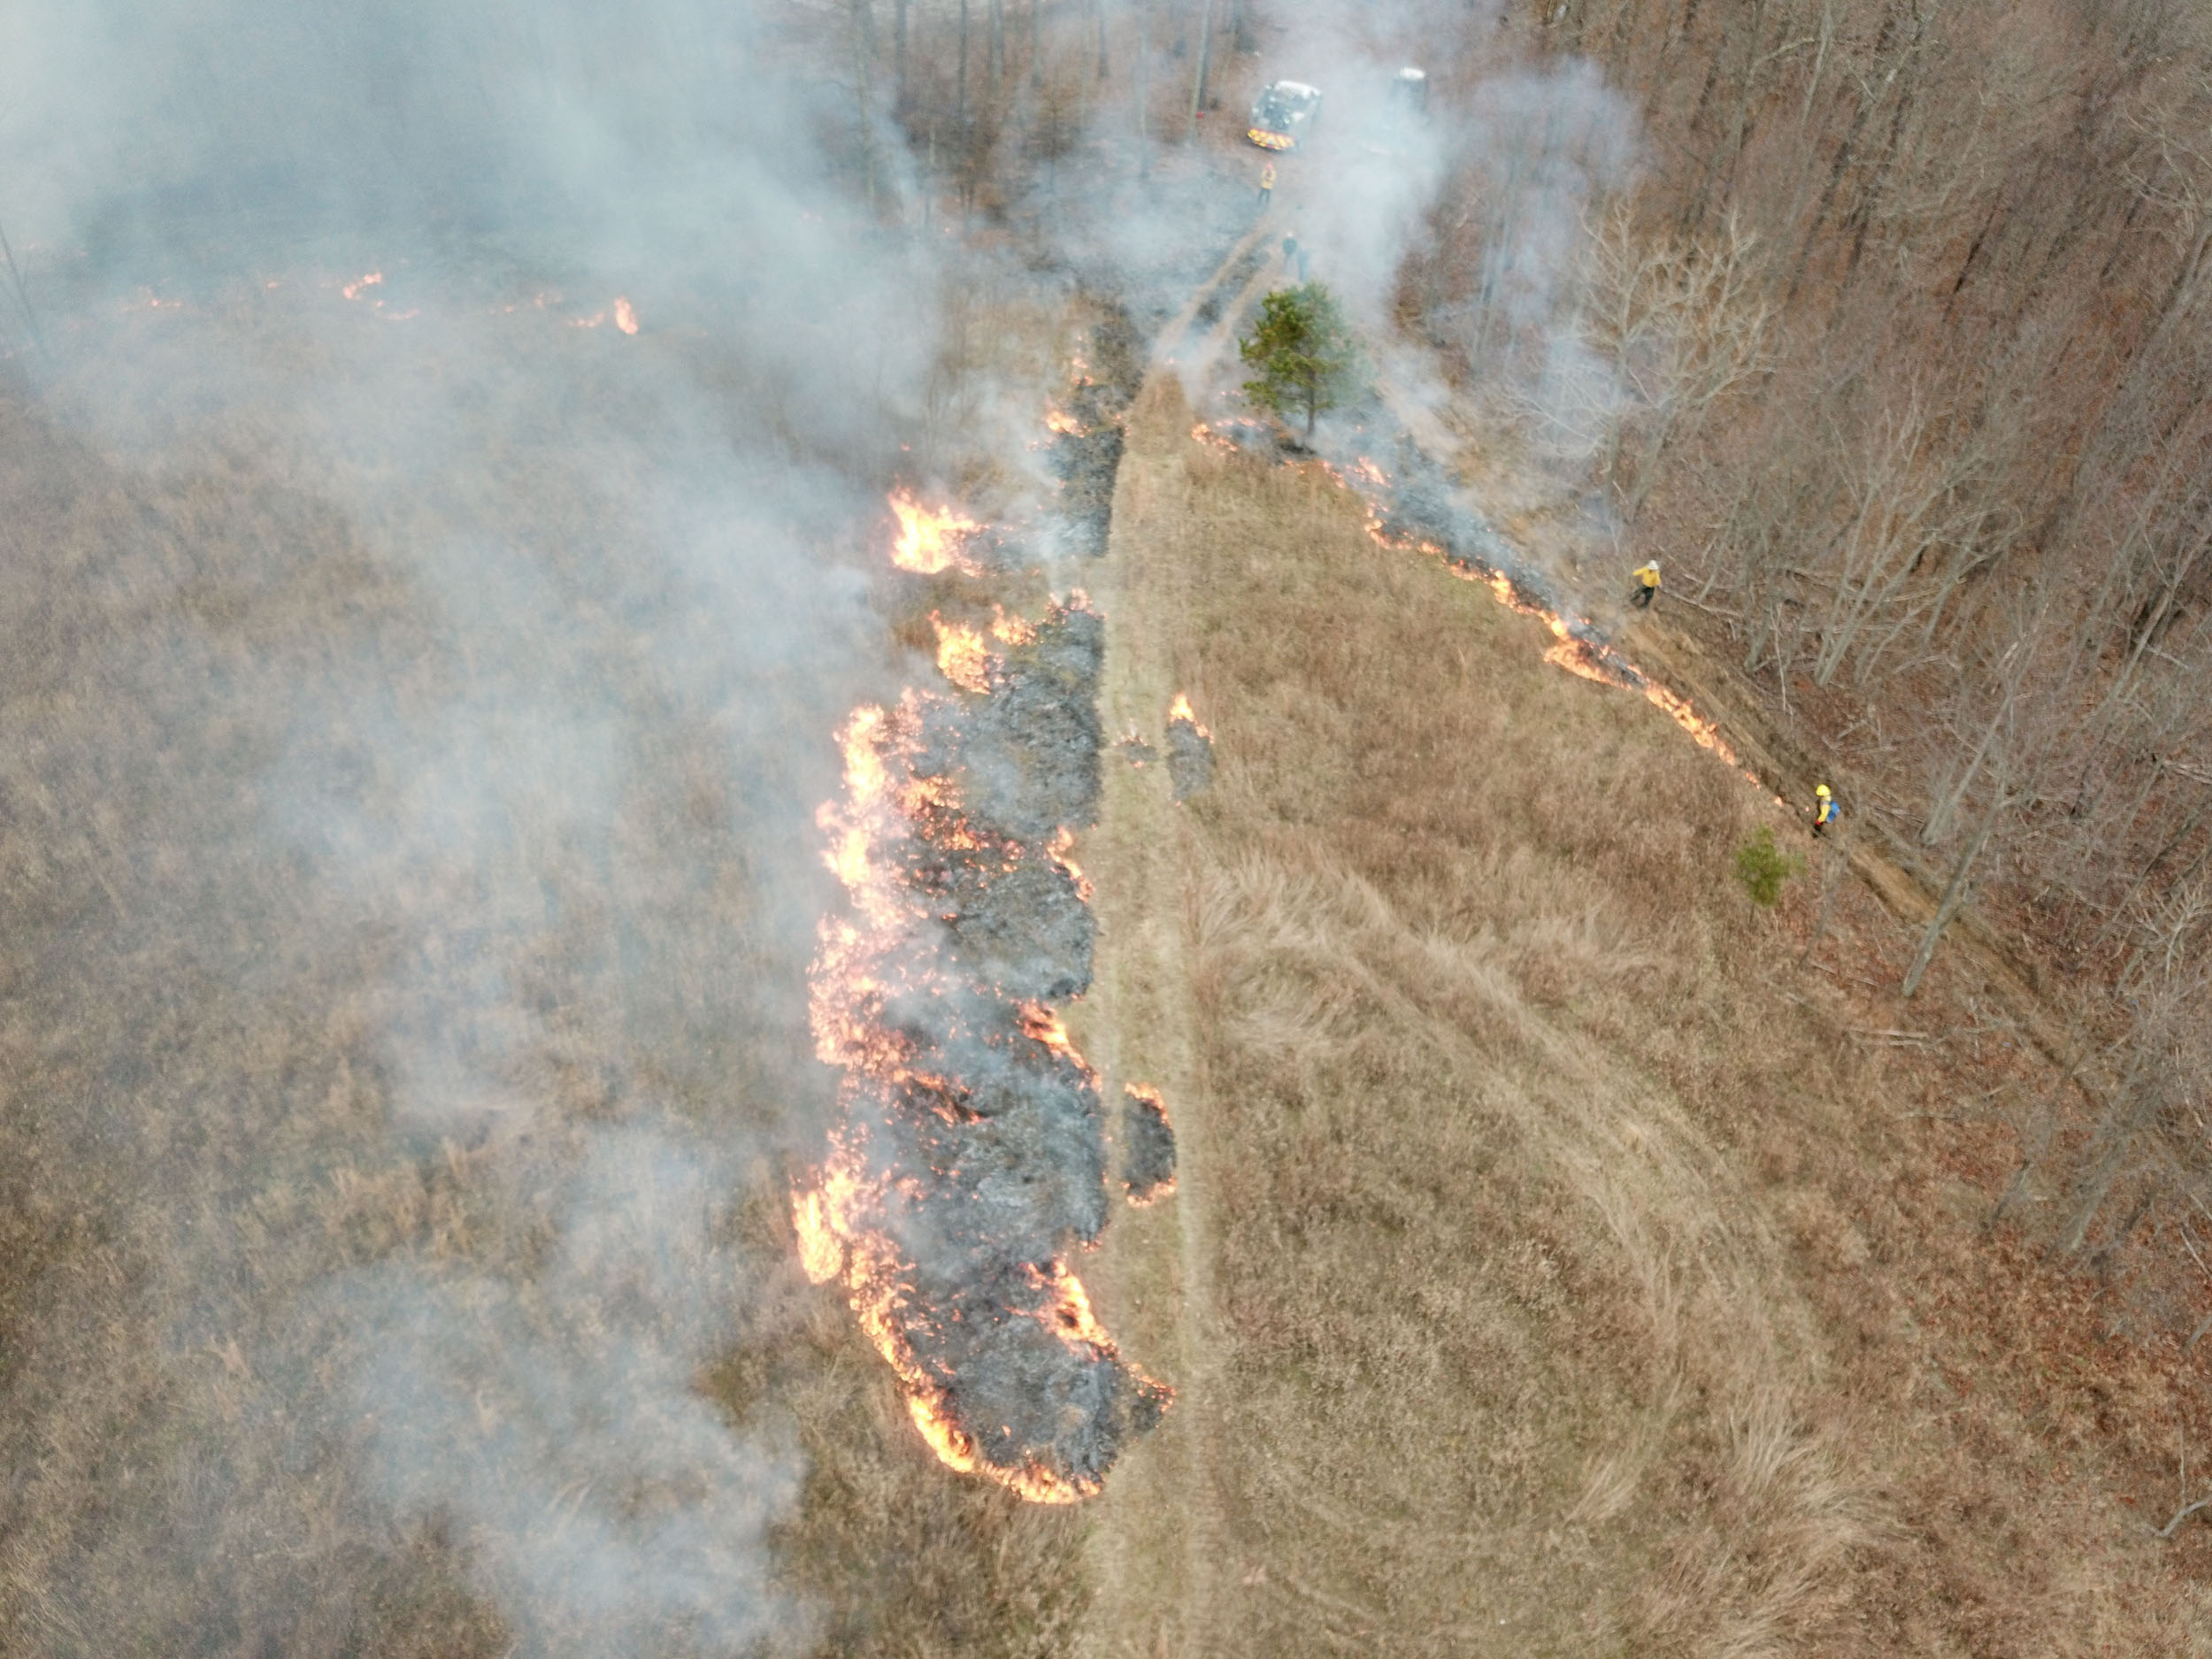 Aerial view of the burn taken from a drone